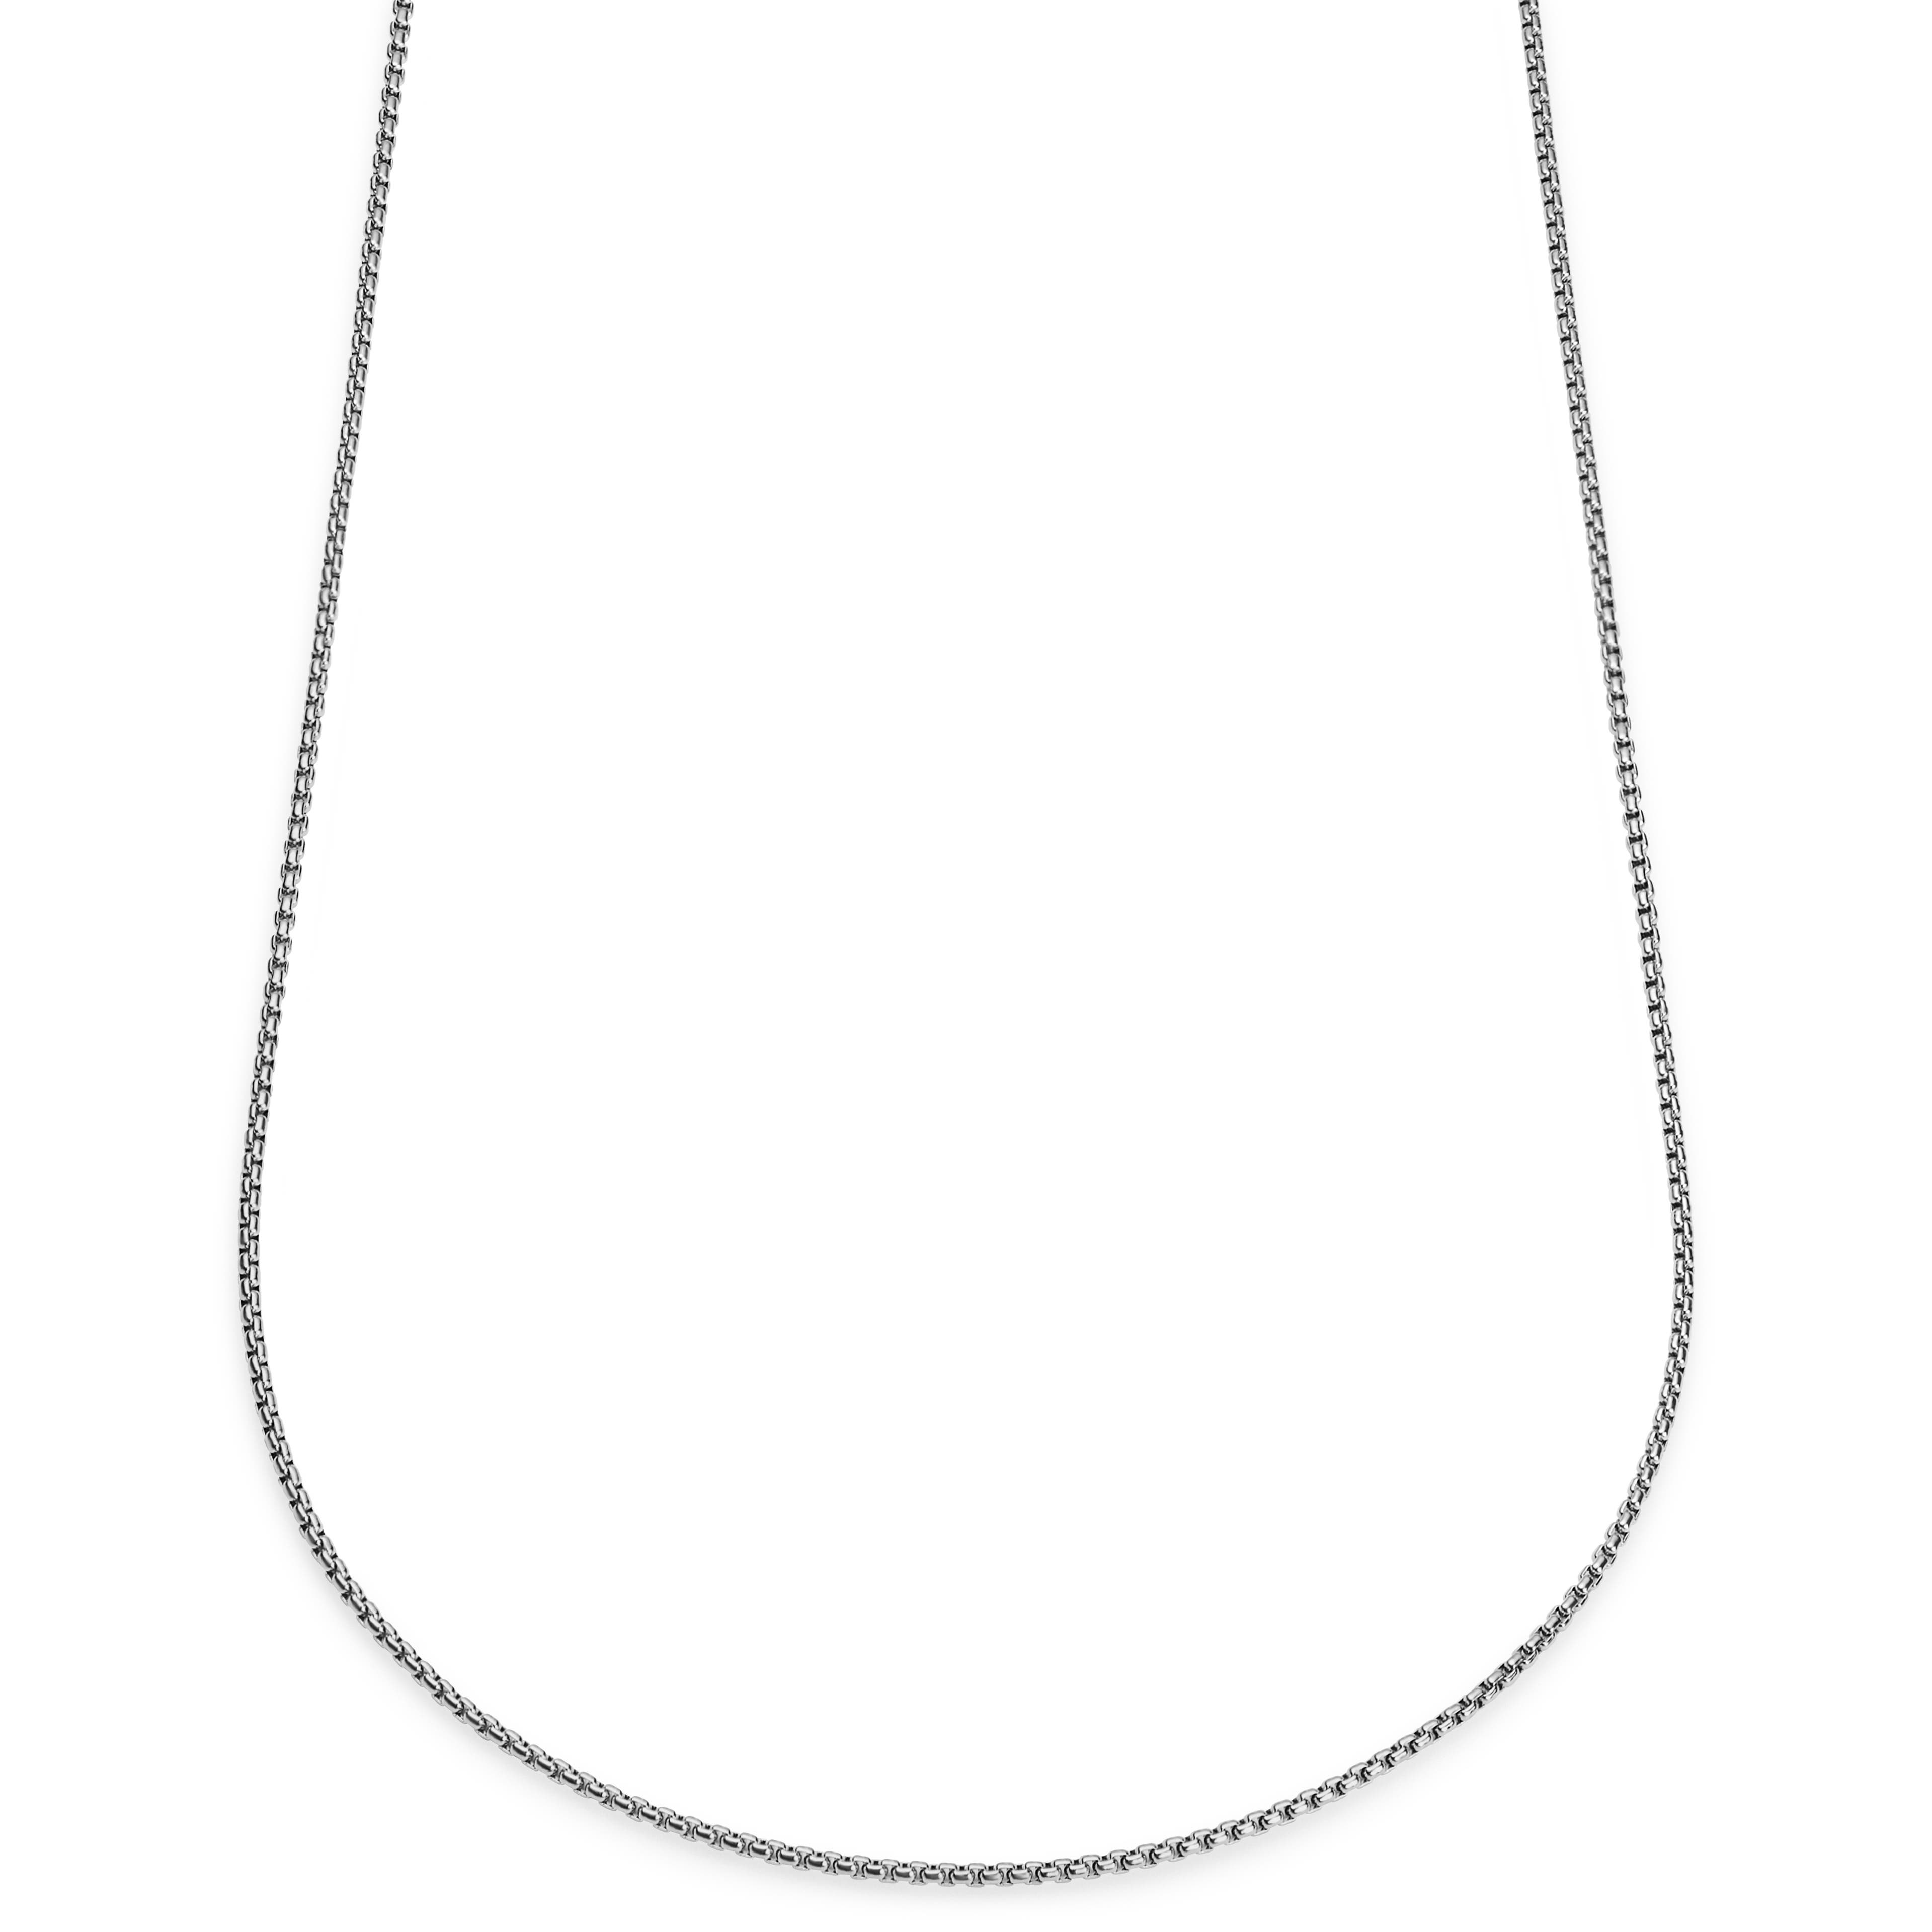 Essentials | 2 mm Silver-Tone Curved Box Chain Necklace